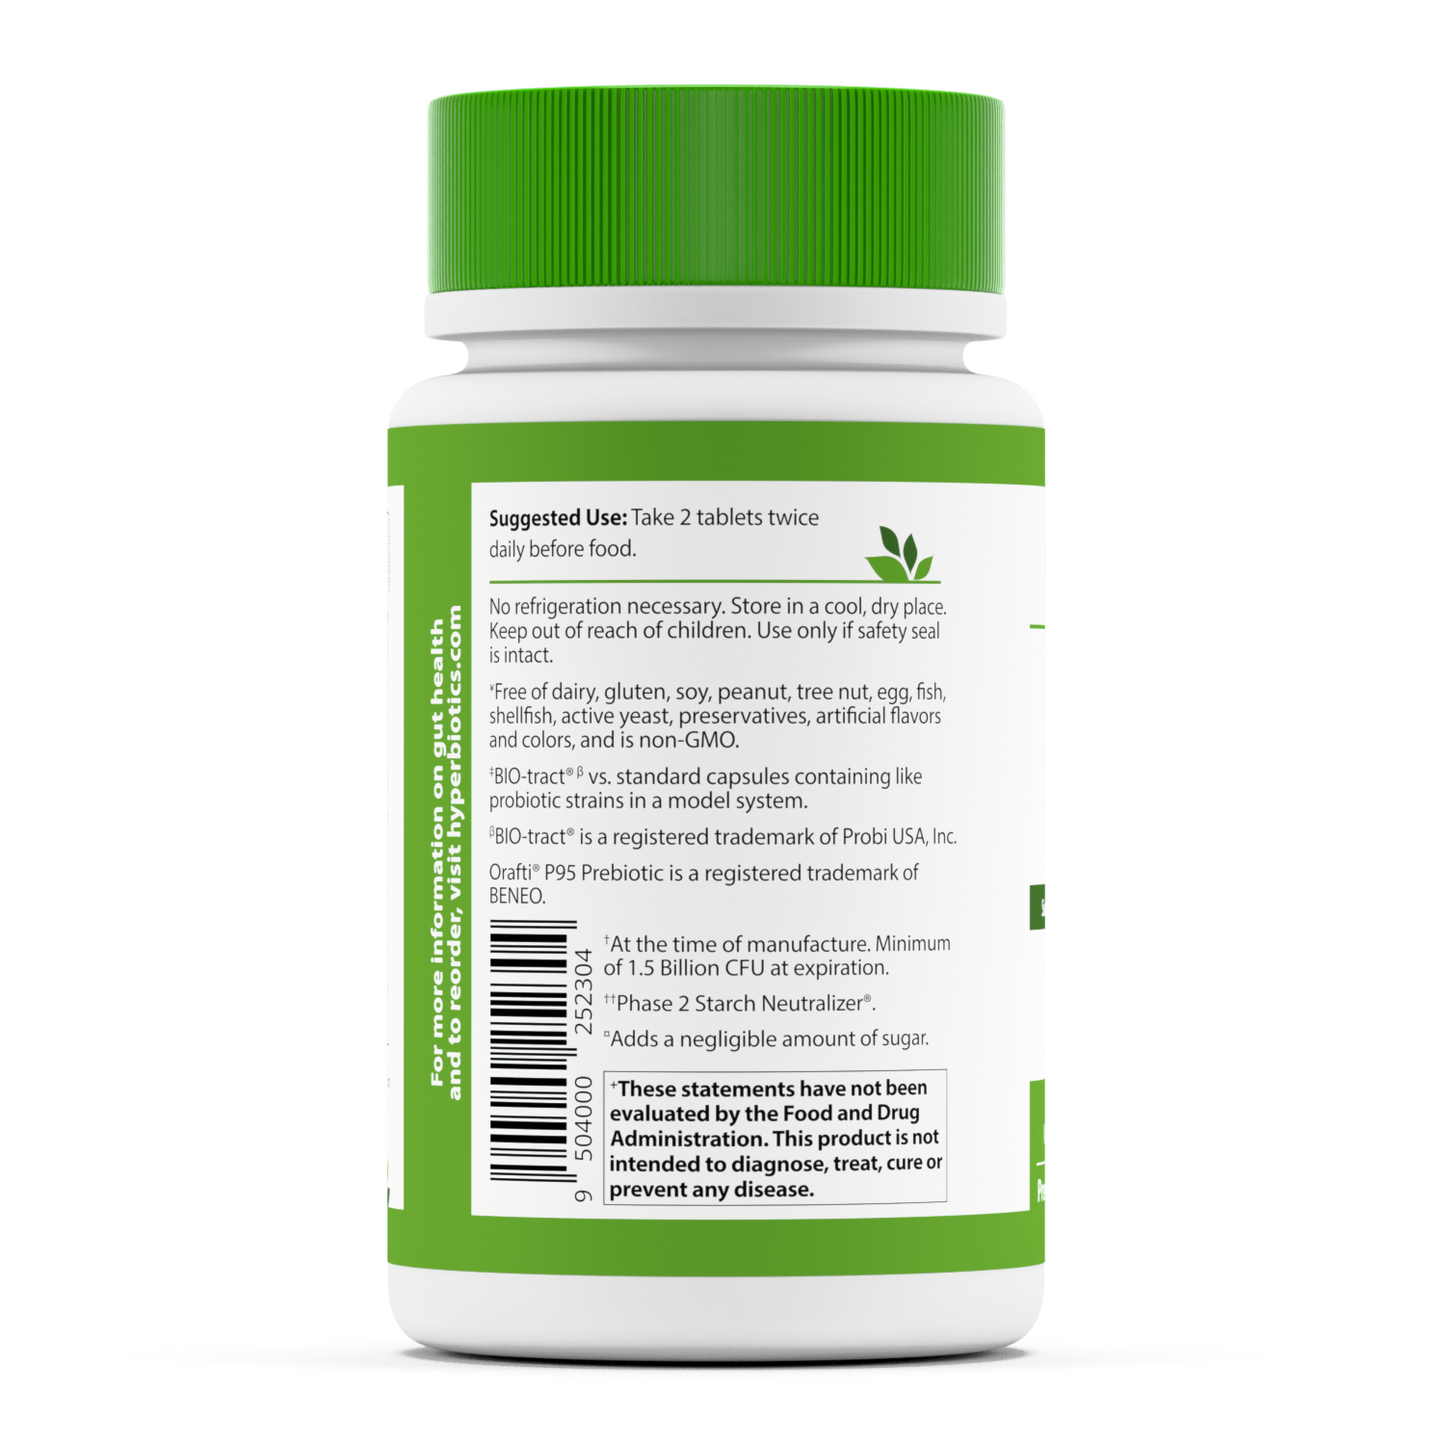 Hyperbiotics PRO-Lean: Satiety and Healthy Metabolic Support Probiotic. Suggested Use and UPC code on bottle.